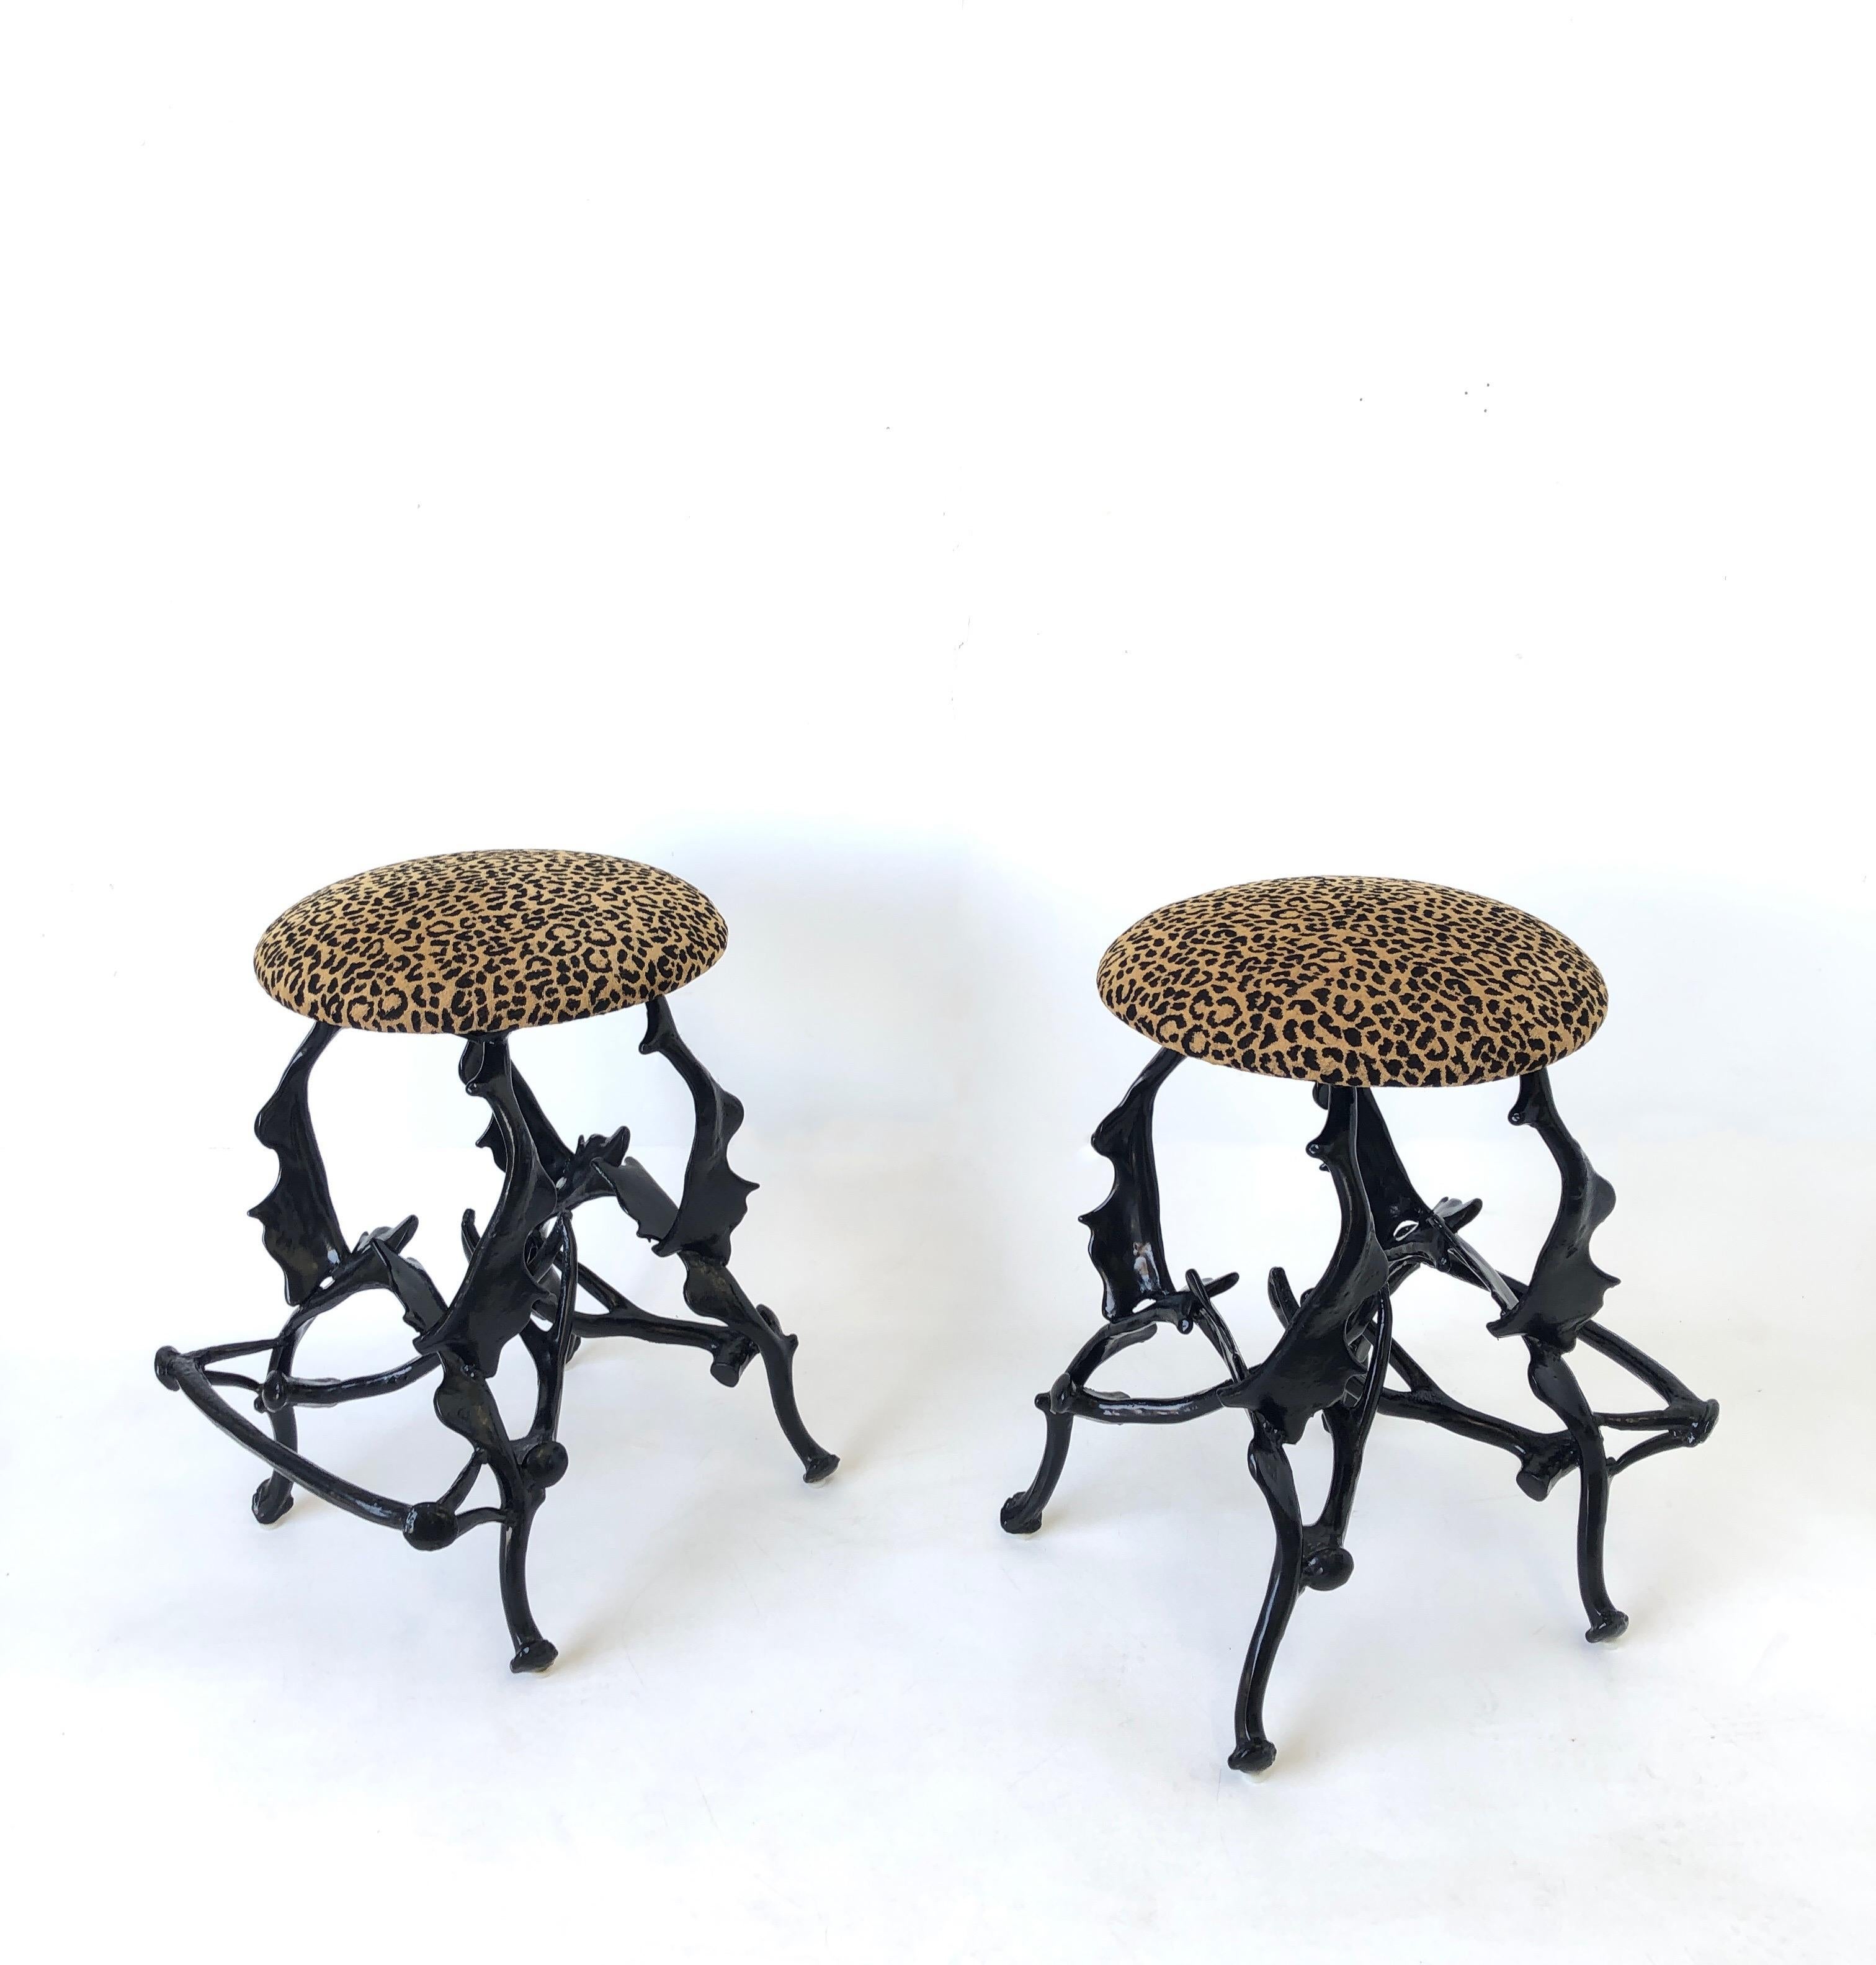 Pair of black faux antlers and leopard print velvet swivel bar stools designed by Arthur Court in the 1970’s. 
Constructed of black powder coated cast aluminum and leopard print velvet fabric. 
The seat swivels 360.
Measurements: 29” High, 17”